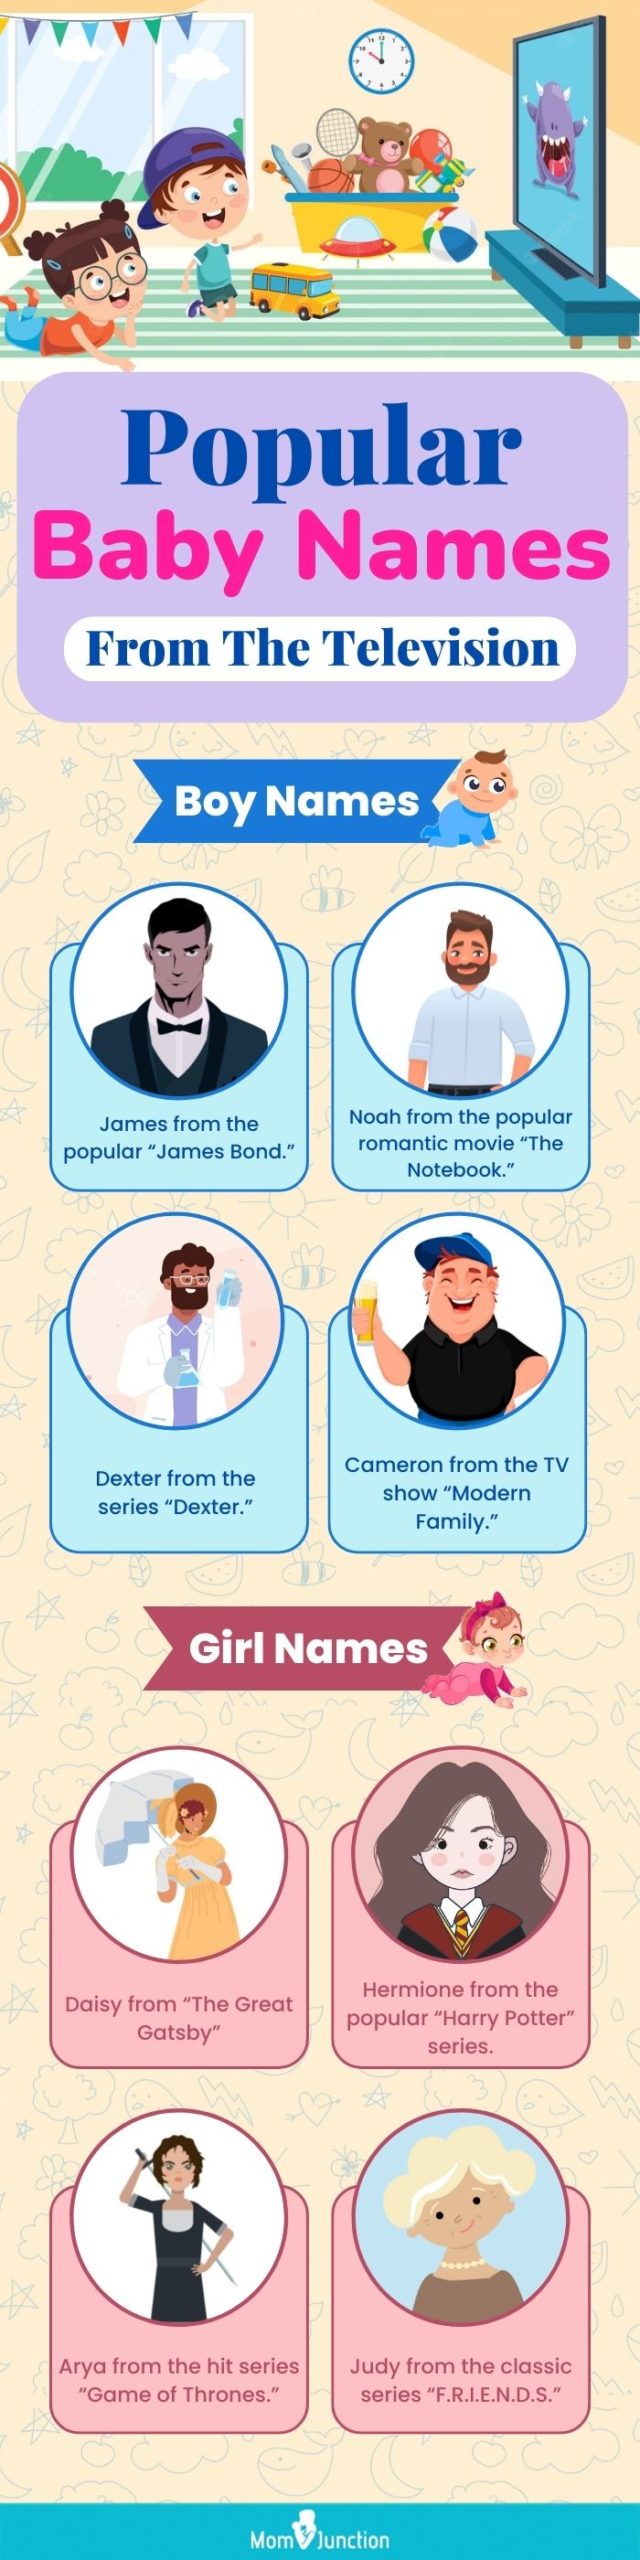 popular baby names from the television [infographic]